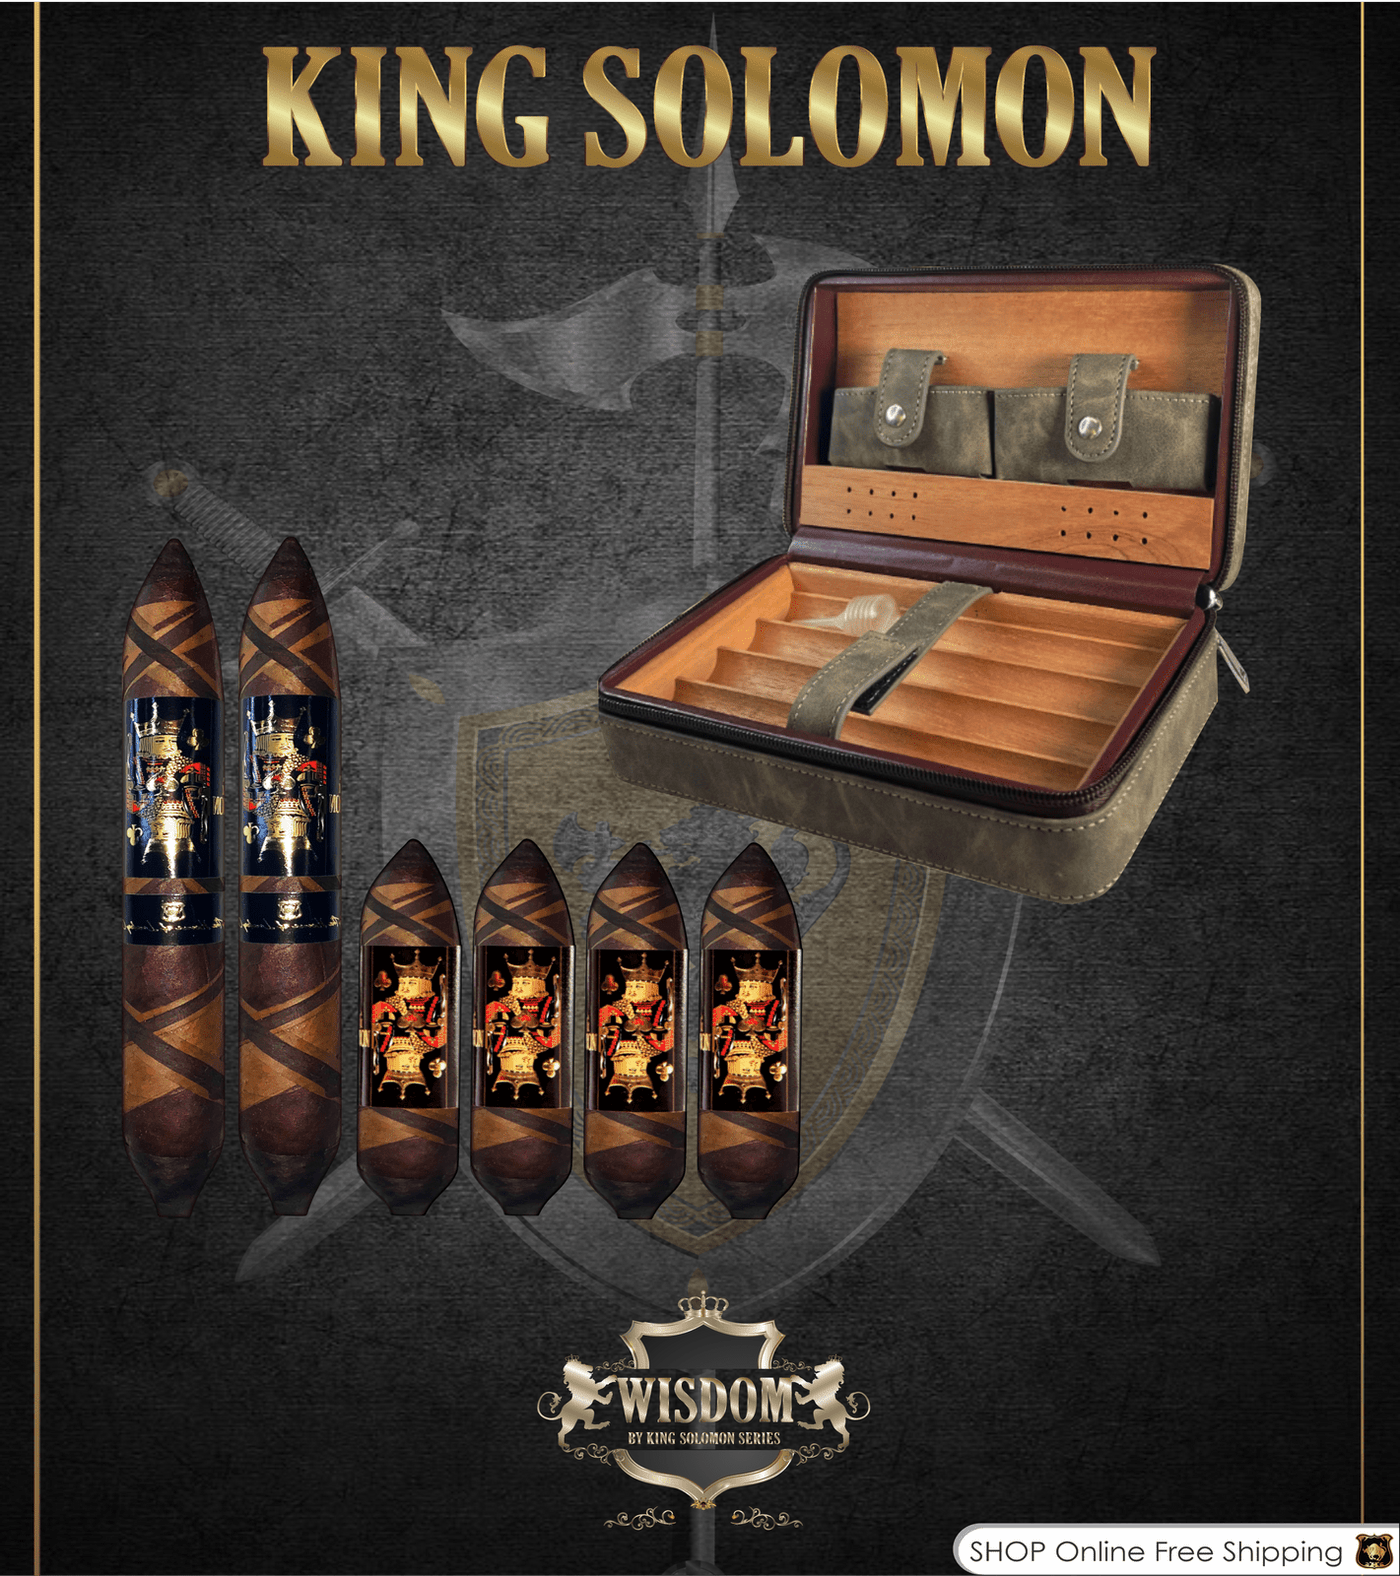 Wisdom 4x60 Cigar From The King Solomon Series: Set of 4 and 2 King Solomon 7x58 Cigar with Travel Humidor